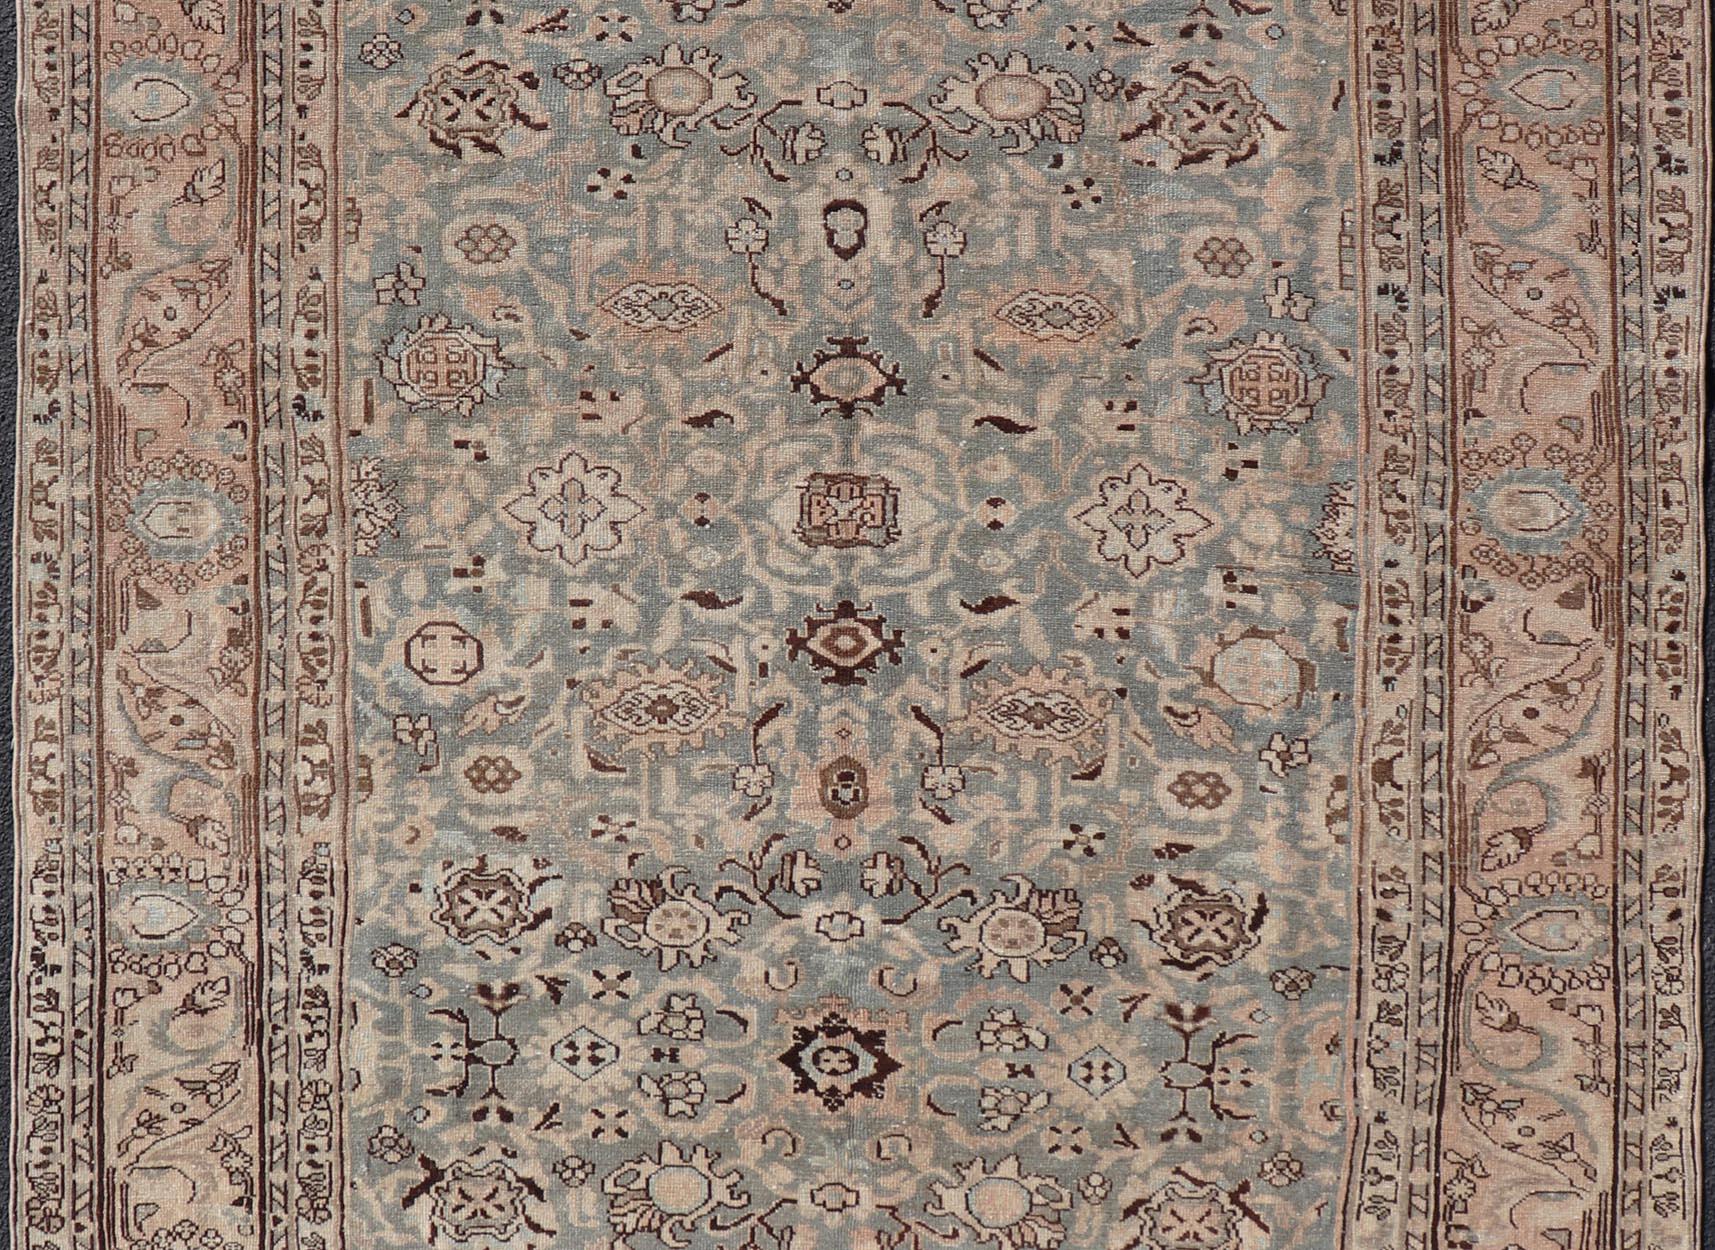 20th Century All-Over Floral Antique Persian Hamadan Rug in Gray Green, Peach & Earth Tones For Sale